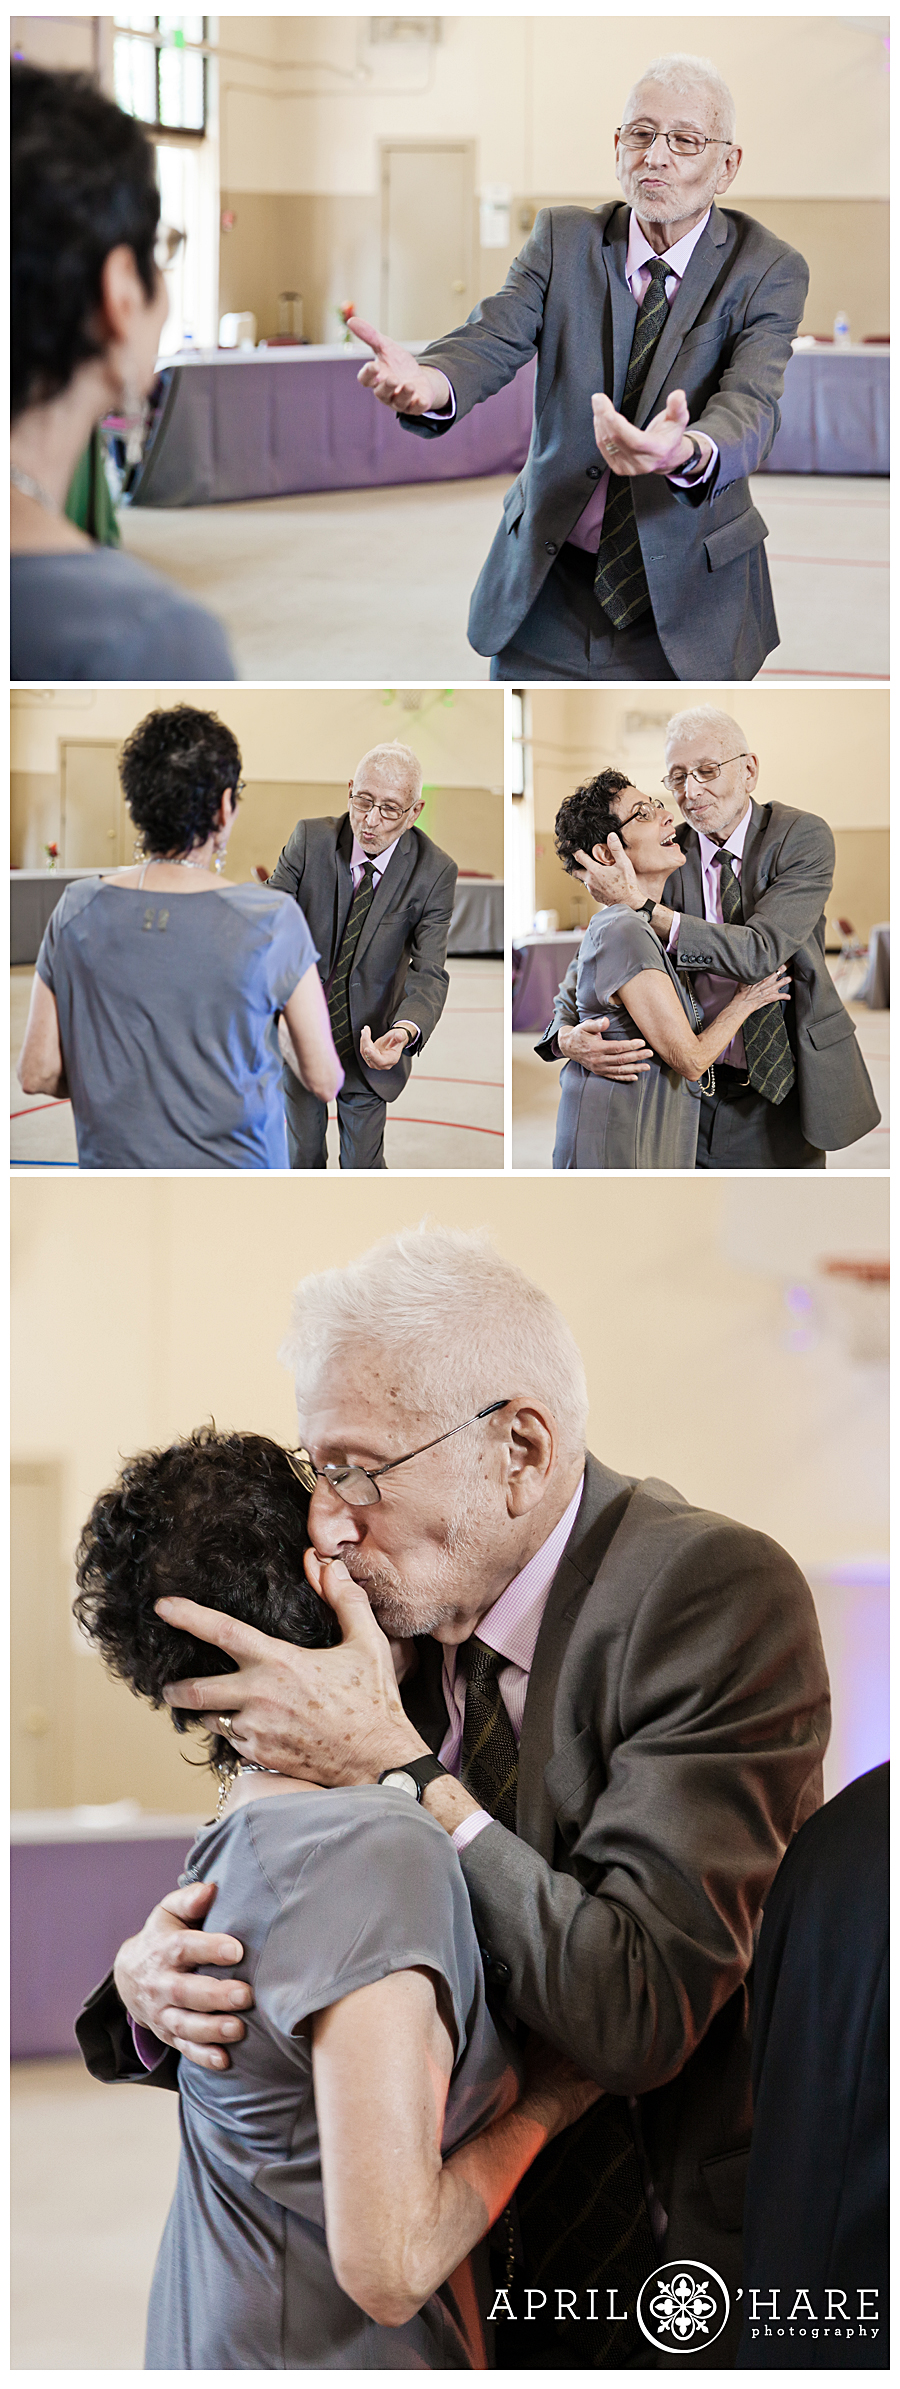 Cute photo of a Jewish grandpa with his wife at his Grandson's Temple Micah Bar Mitzvah in Denver Colorado